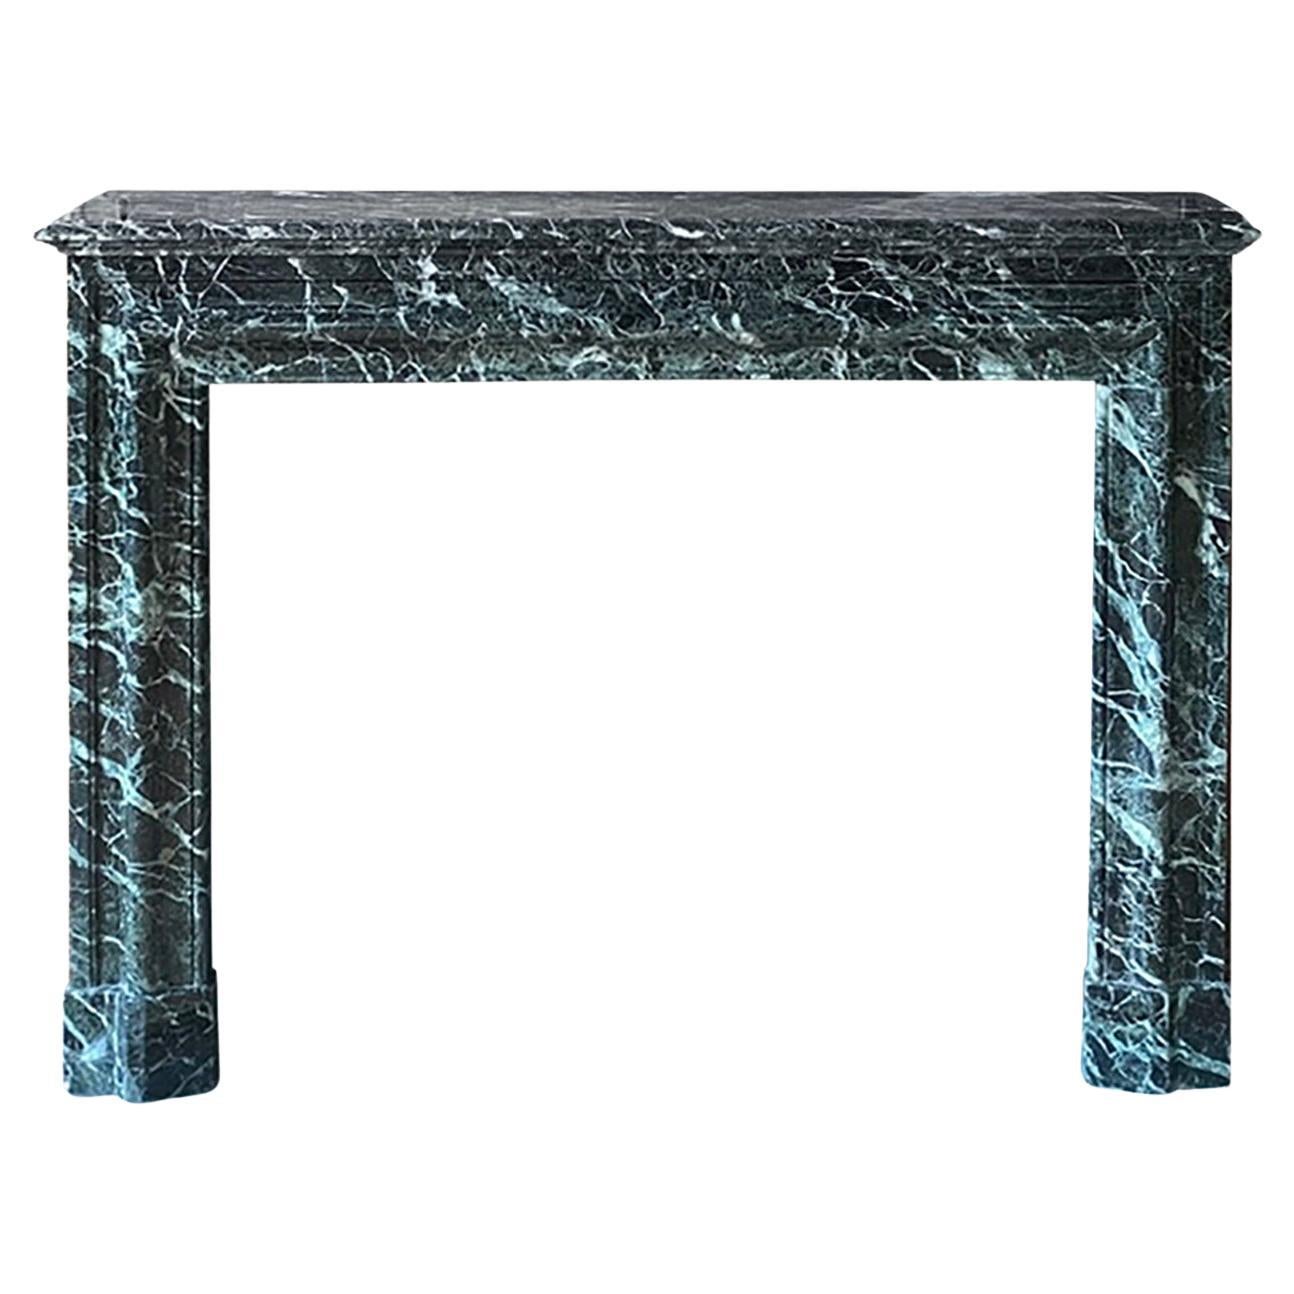 Antique French White Veining Green Marble Mantel For Sale